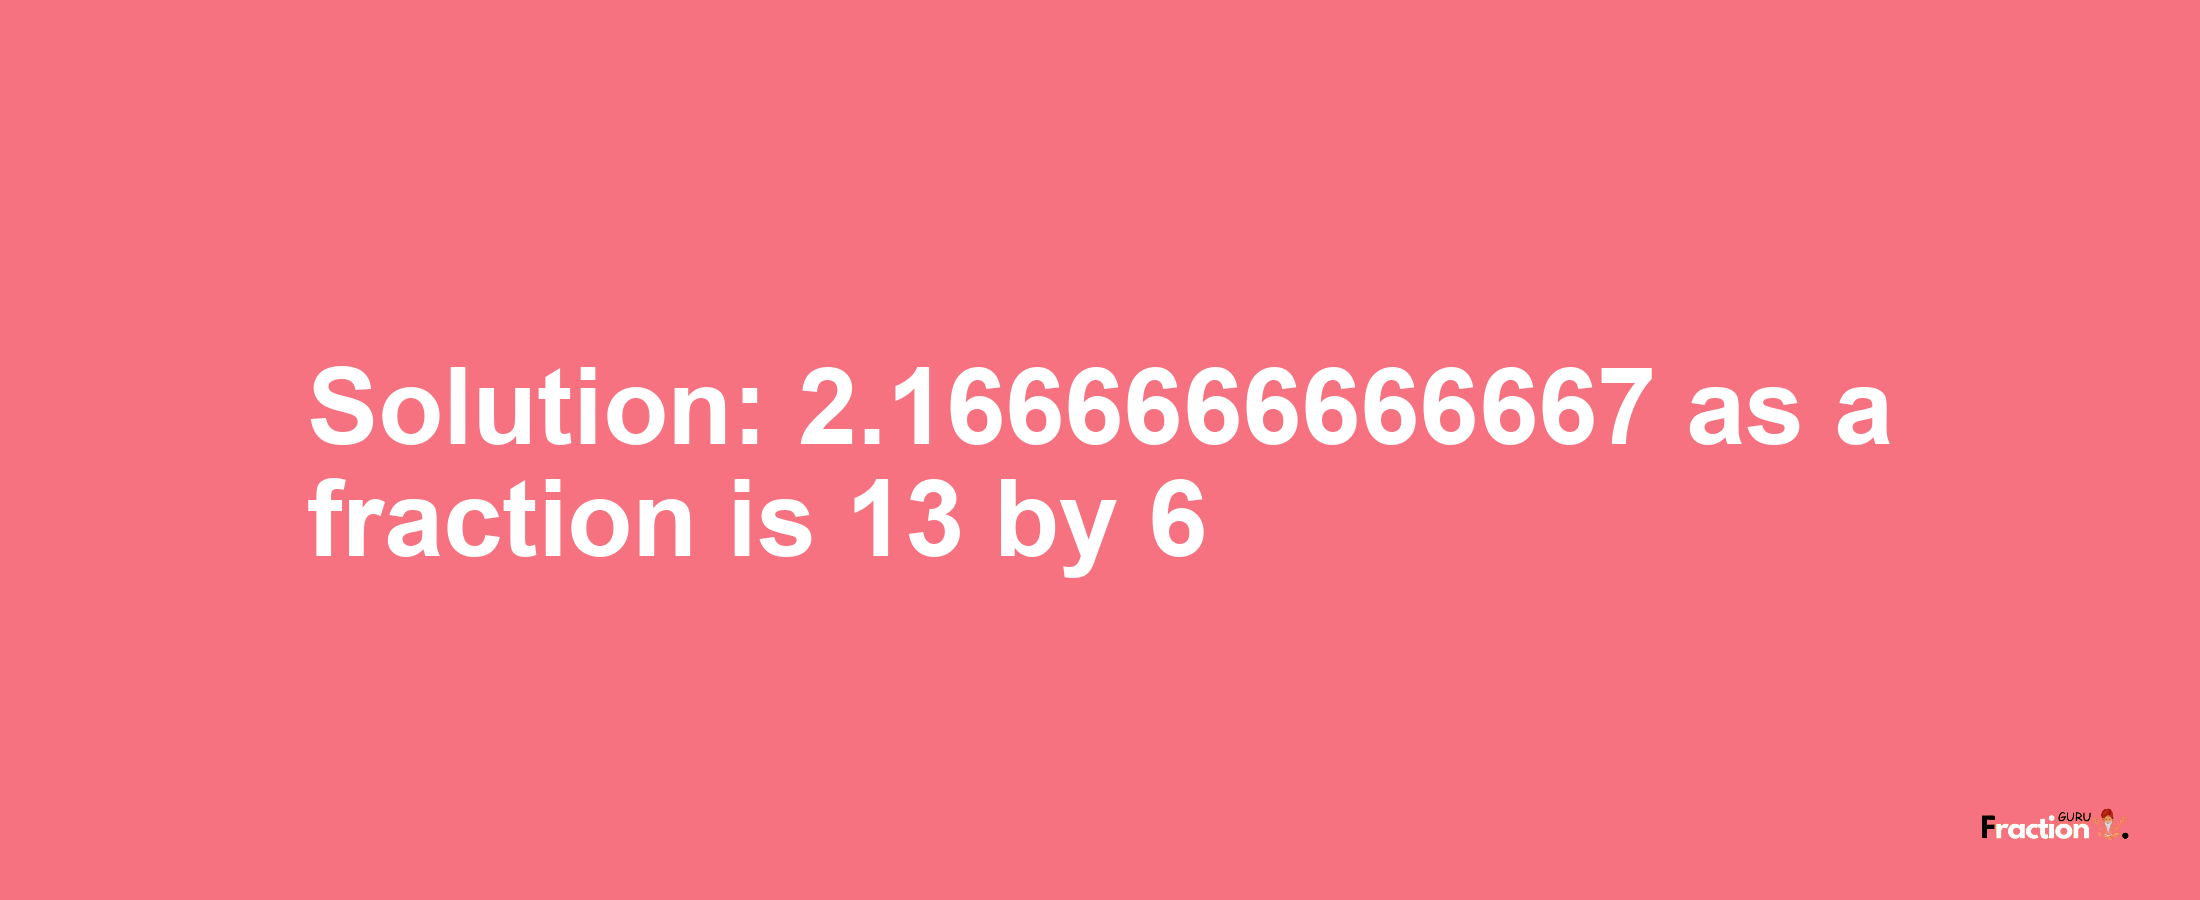 Solution:2.1666666666667 as a fraction is 13/6